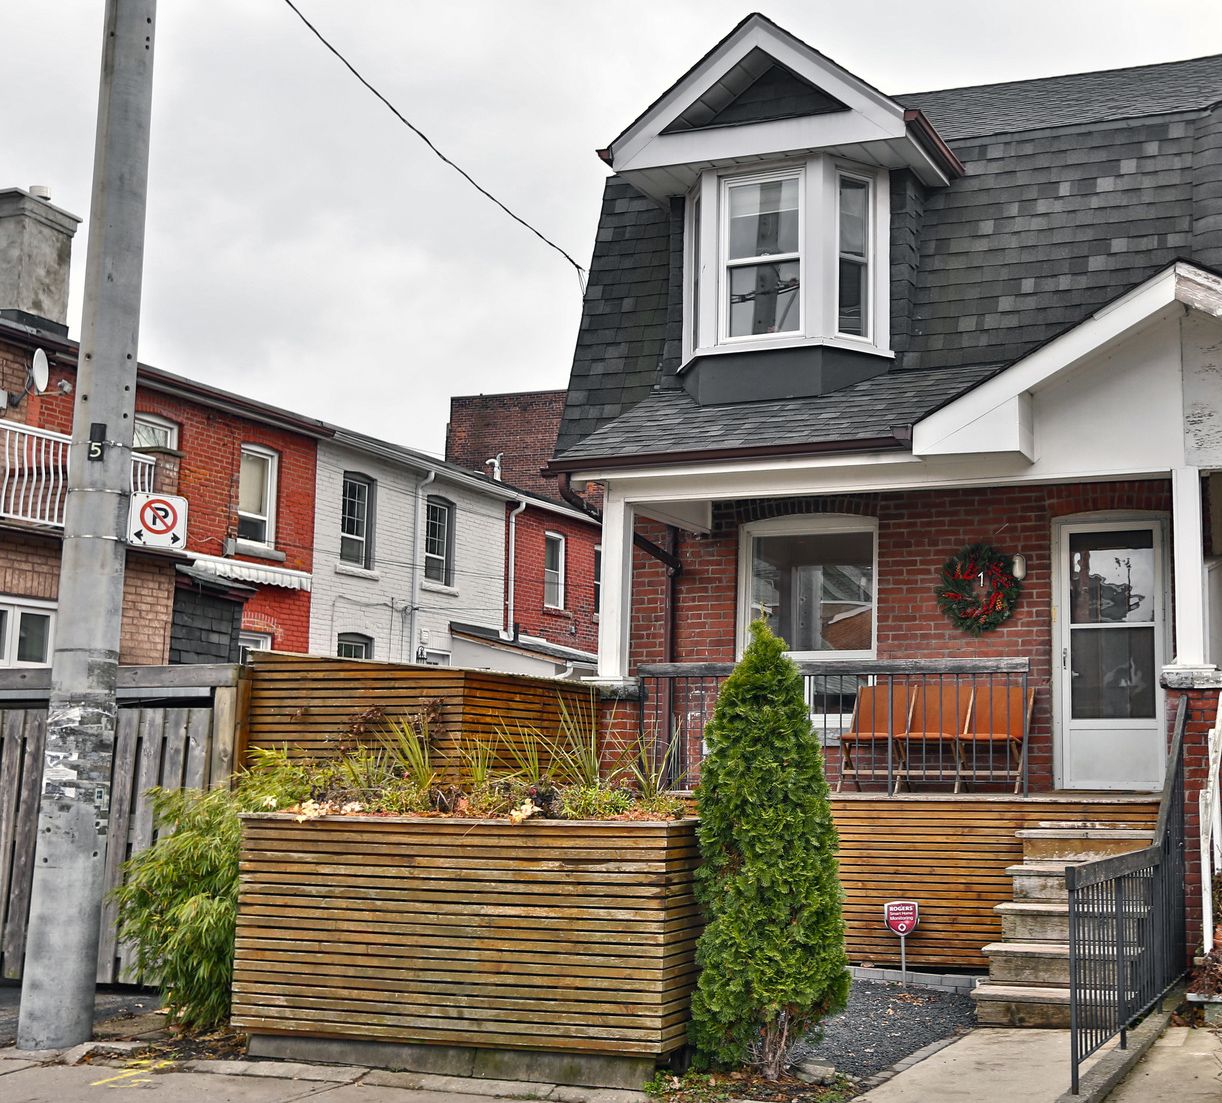 Main Photo: 1 Delaney Crescent in Toronto: Little Portugal House (2-Storey) for sale (Toronto C01)  : MLS®# C4312755